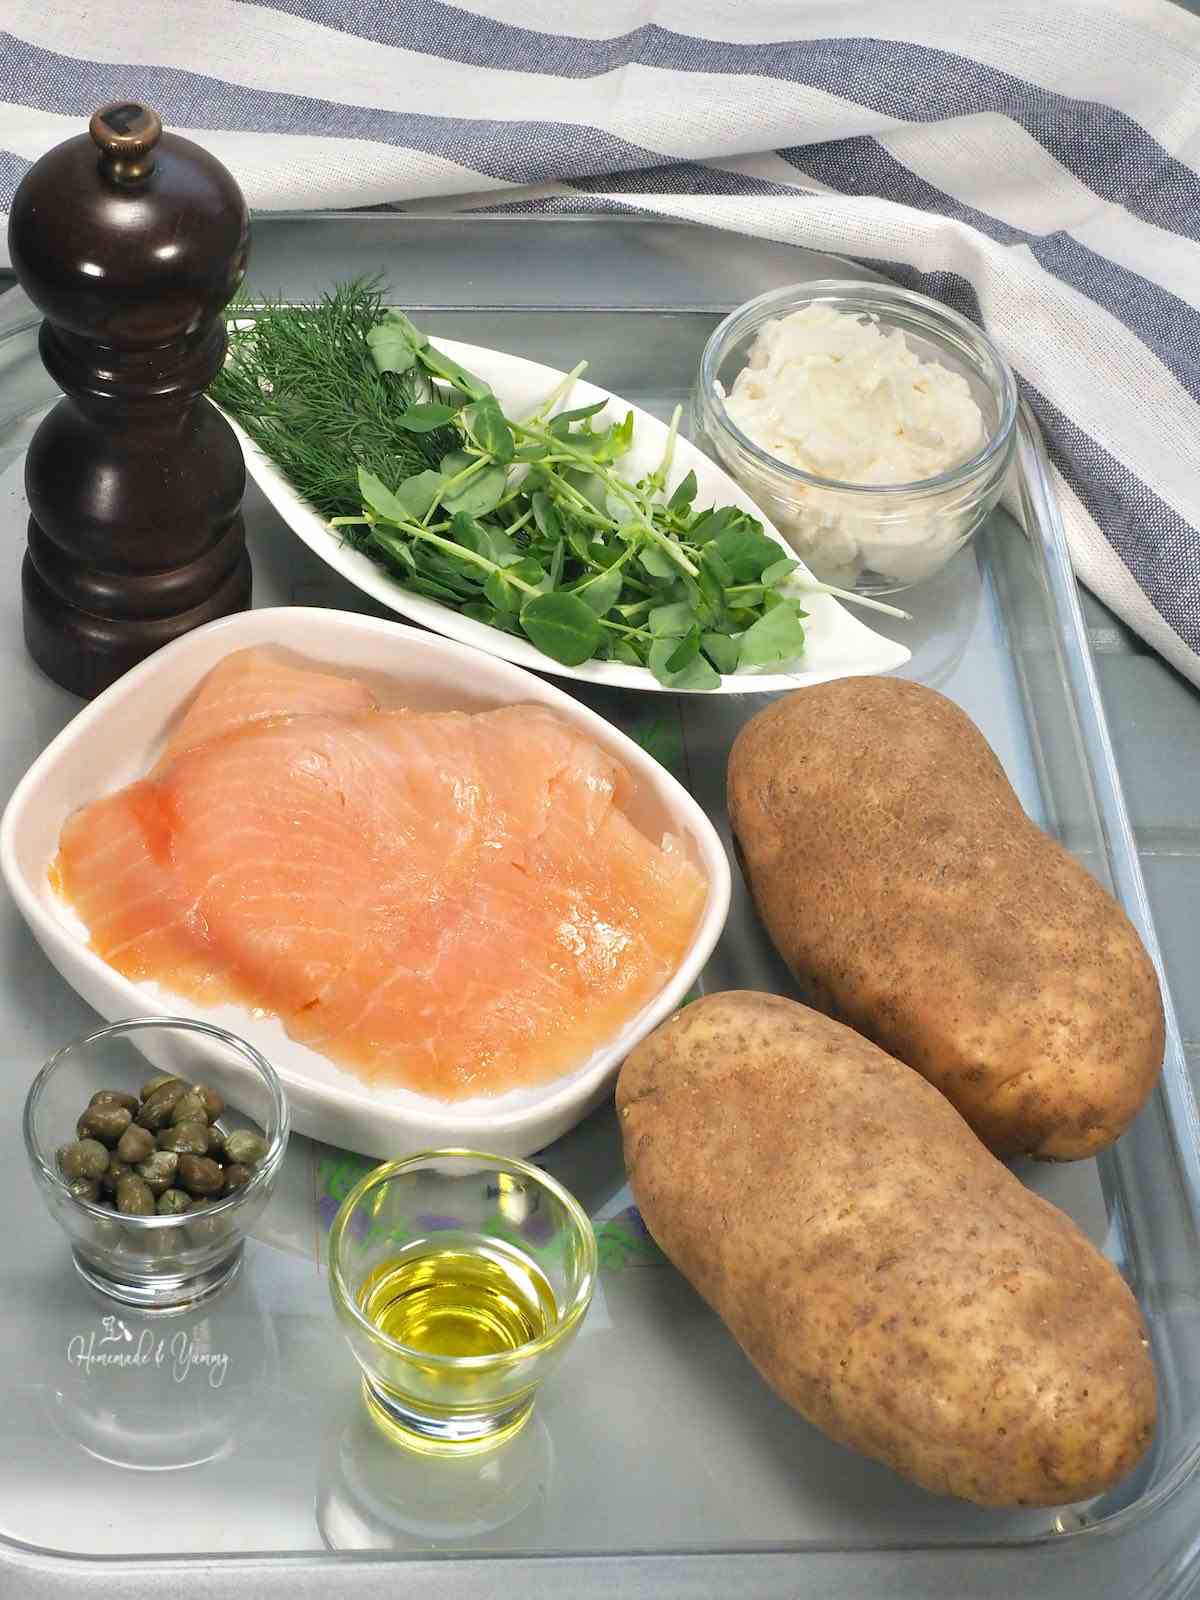 Ingredients for this baked potato with smoked salmon recipe.